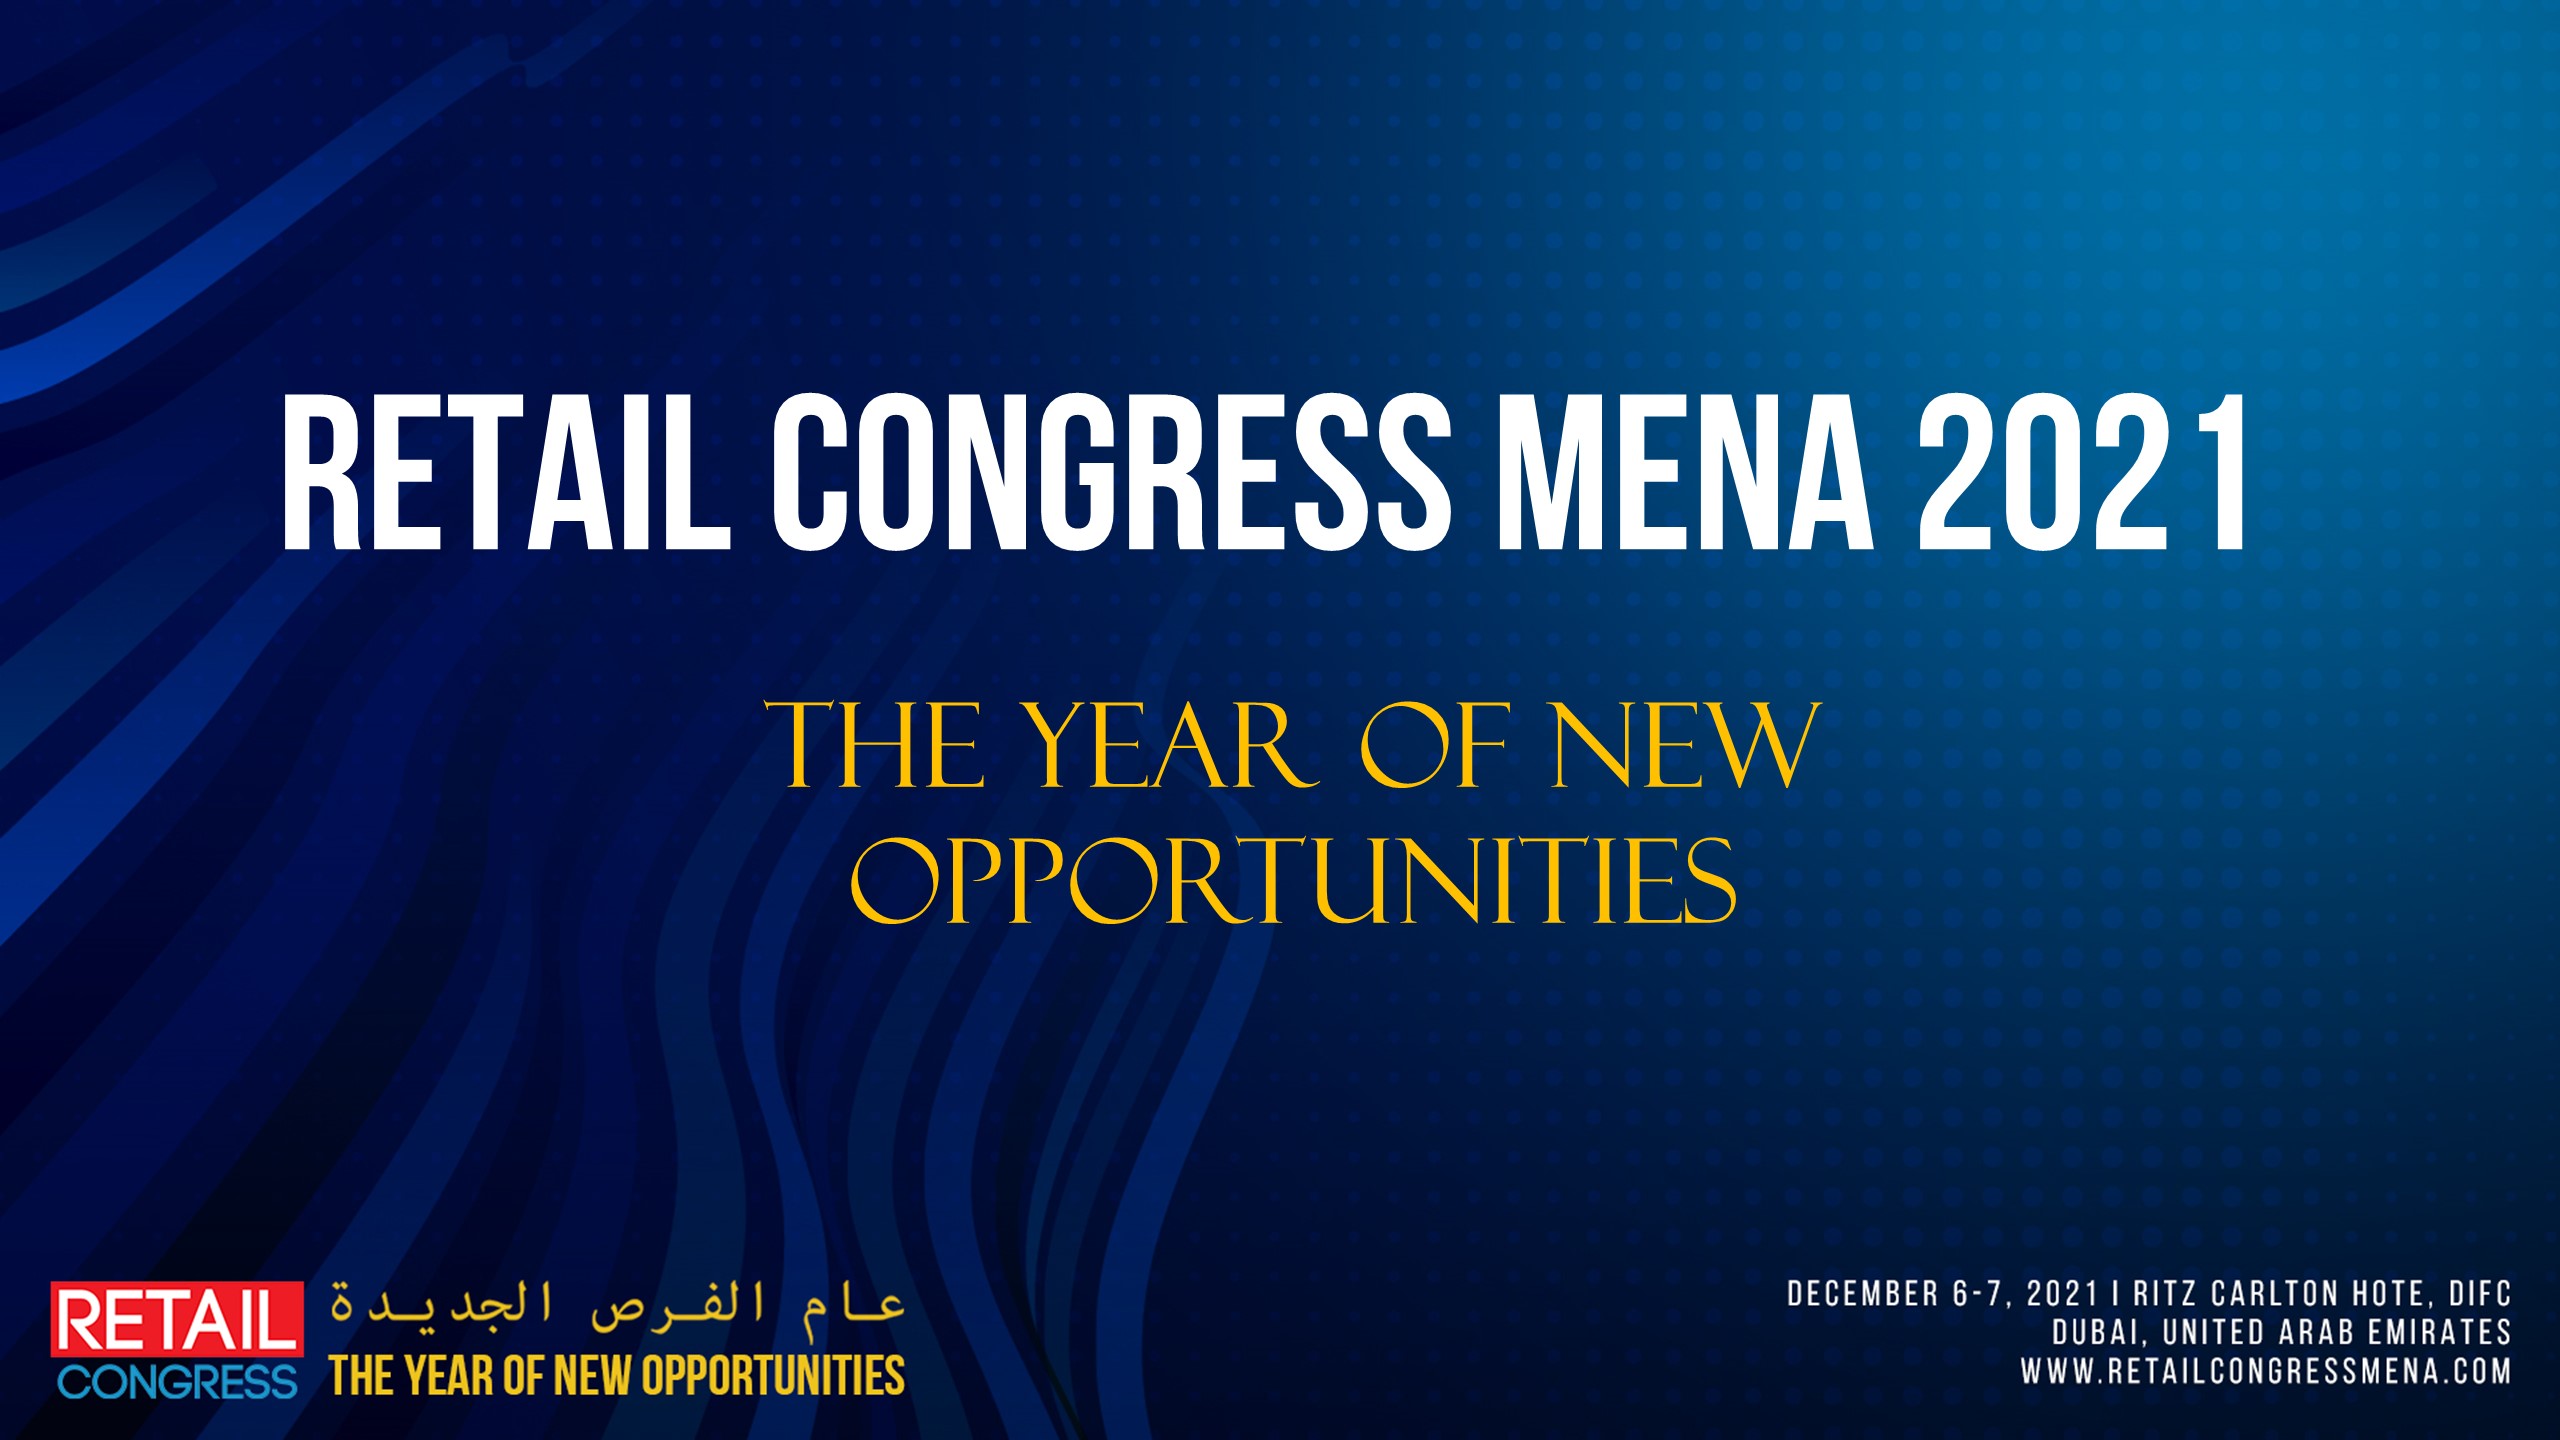 Retail Congress MENA 2021 – The Year of New Opportunities